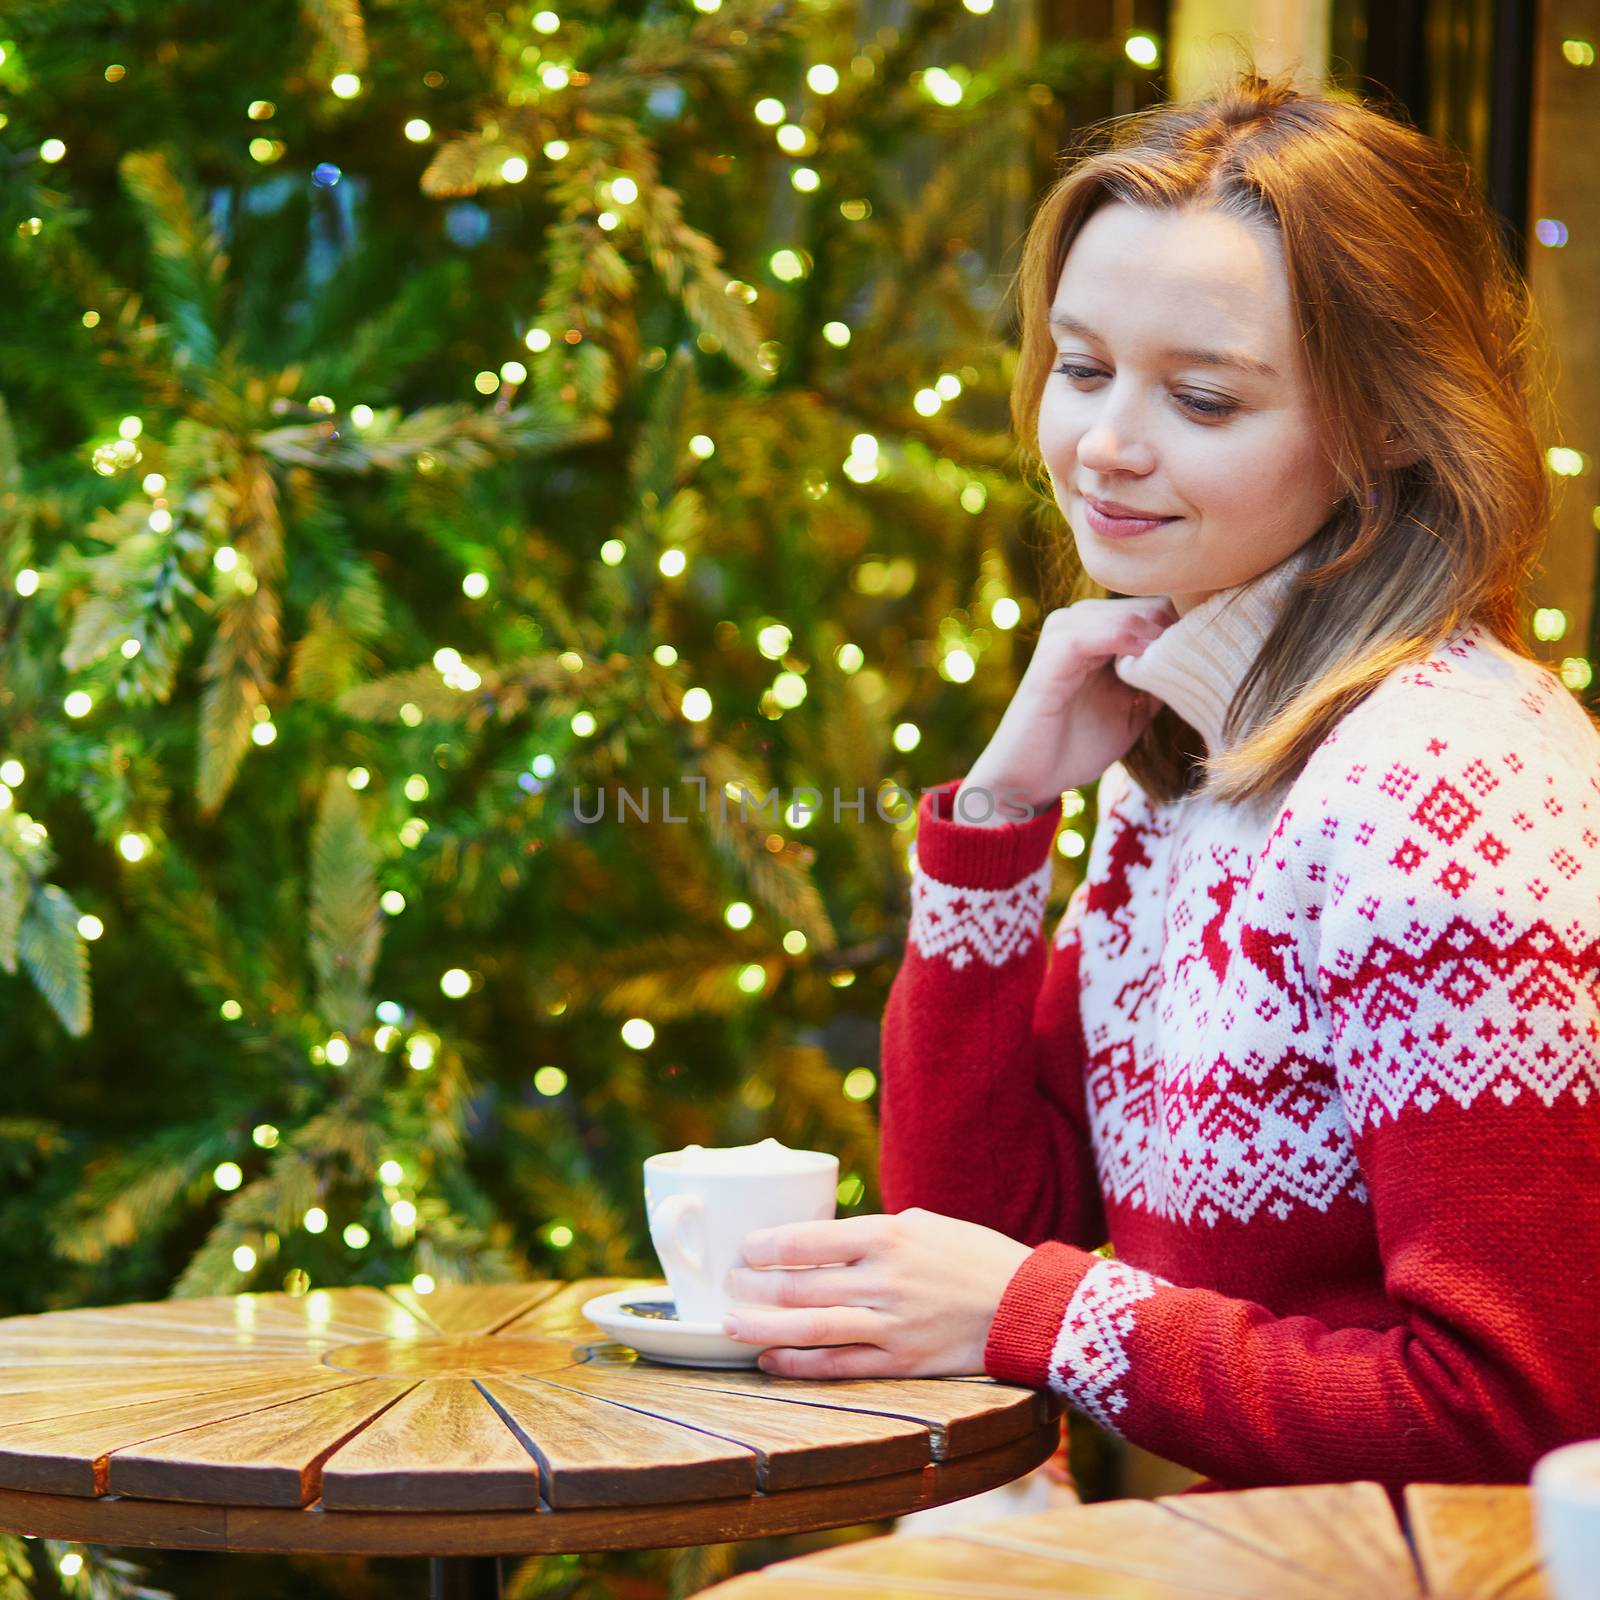 Cheerful young girl in warm red knitted holiday sweater drinking coffee or hot chocolate in cafe decorated for Christmas